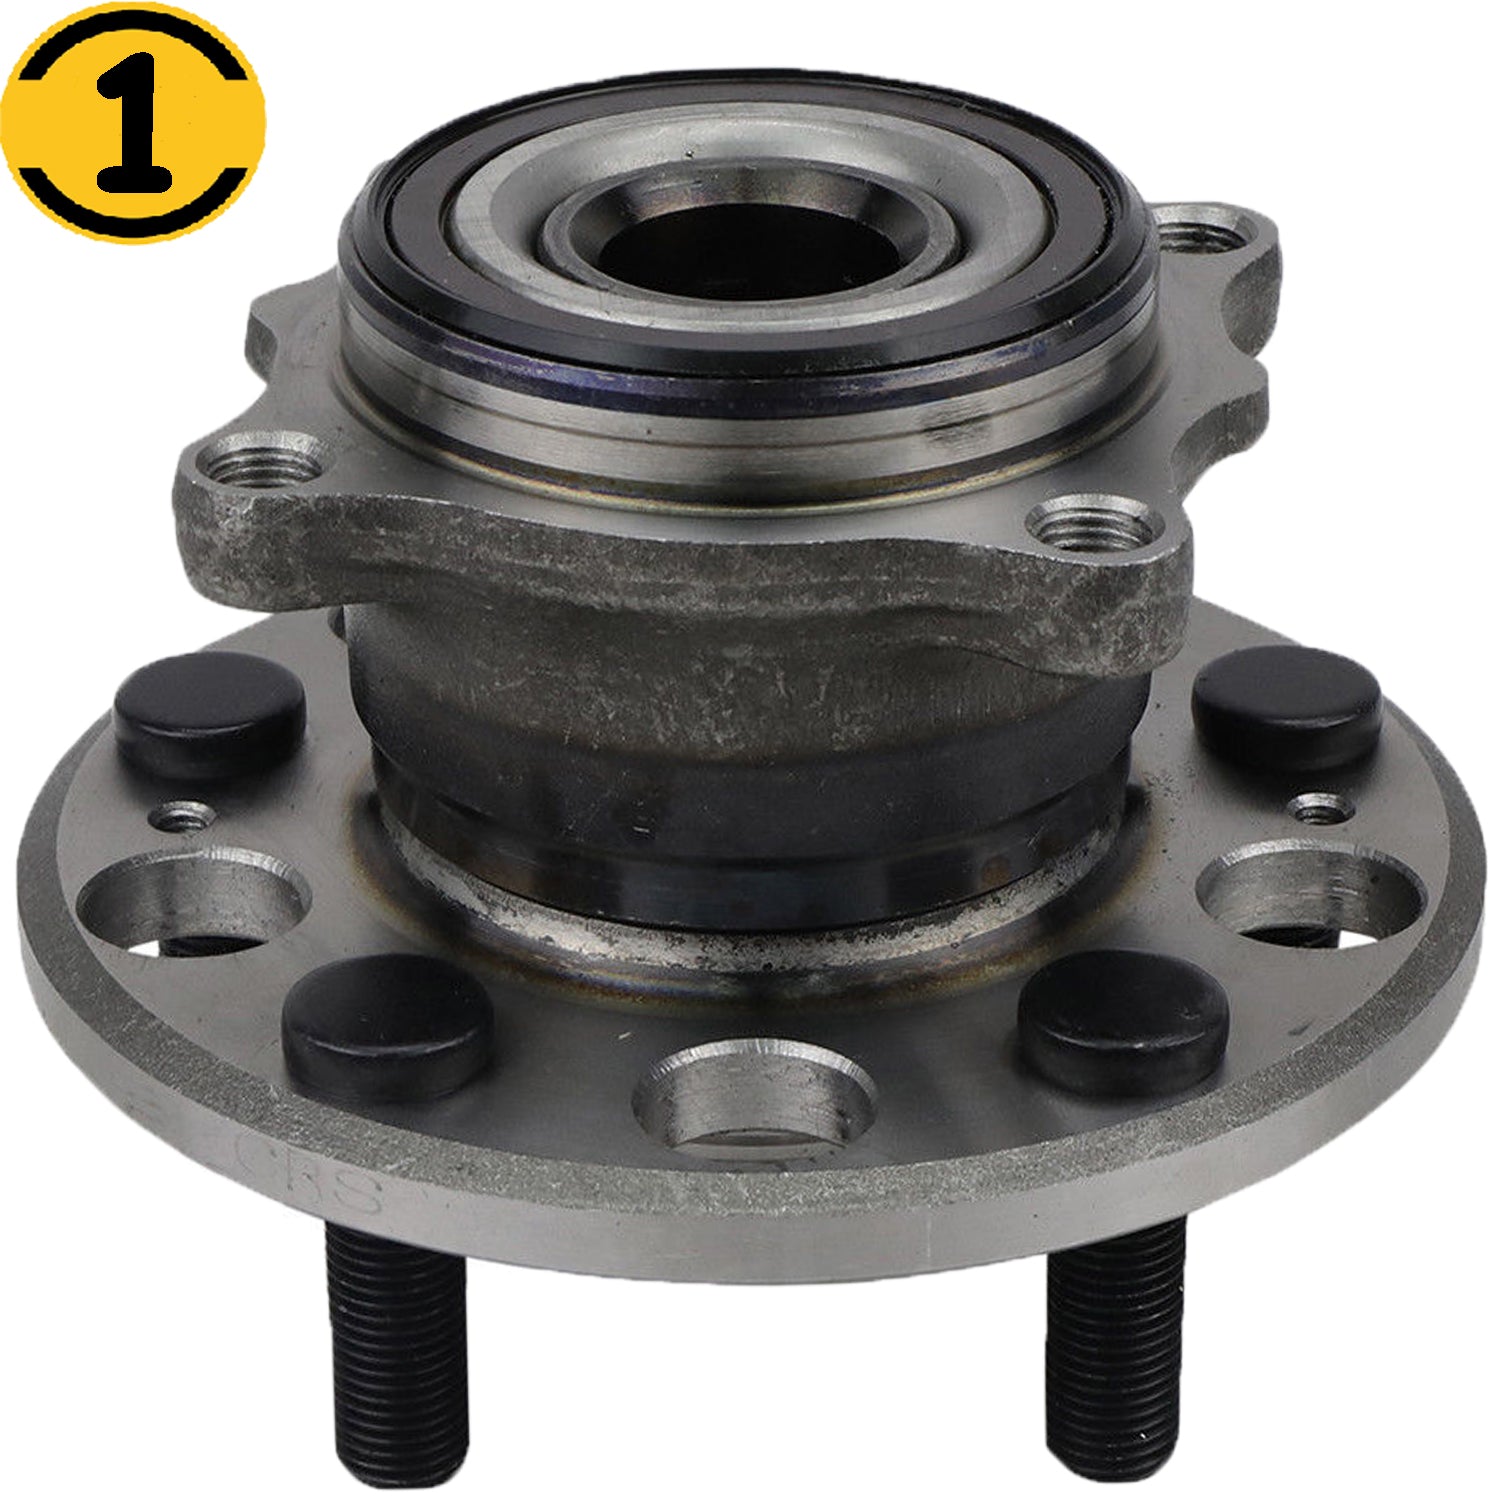 MotorbyMotor 512321 Rear Wheel Bearing & Hub Assembly with 5 Lugs,2005-2012 Acura RL,2009-2013 Acura TL Low-Runout OE Directly Replacement (w/ABS, AWD) MotorbyMotor